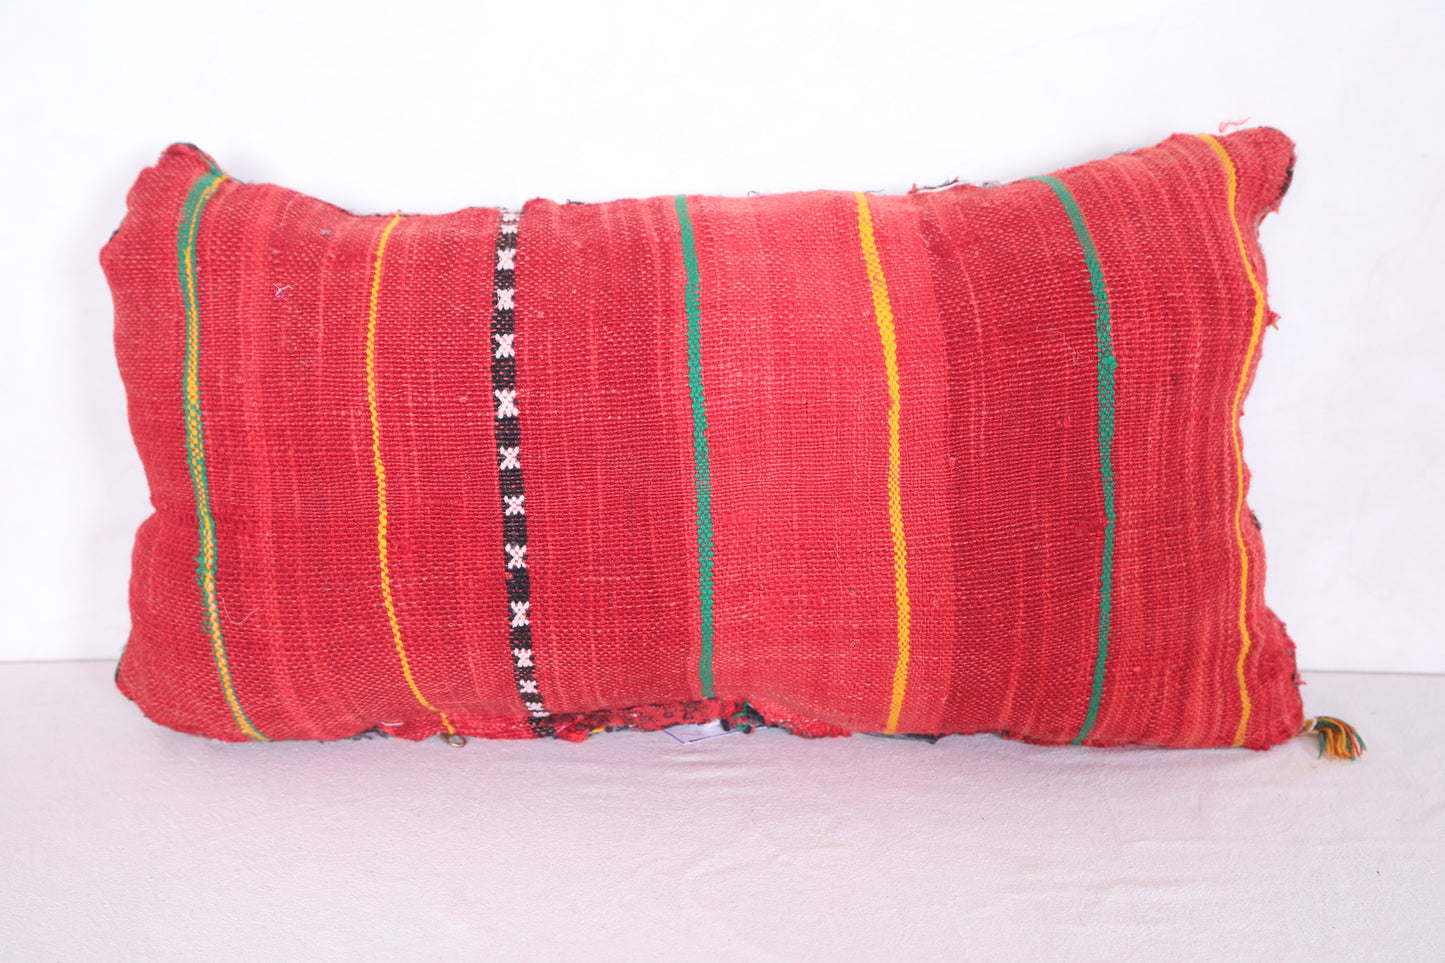 Moroccan handmade kilim pillow 13.7 INCHES X 24.8 INCHES